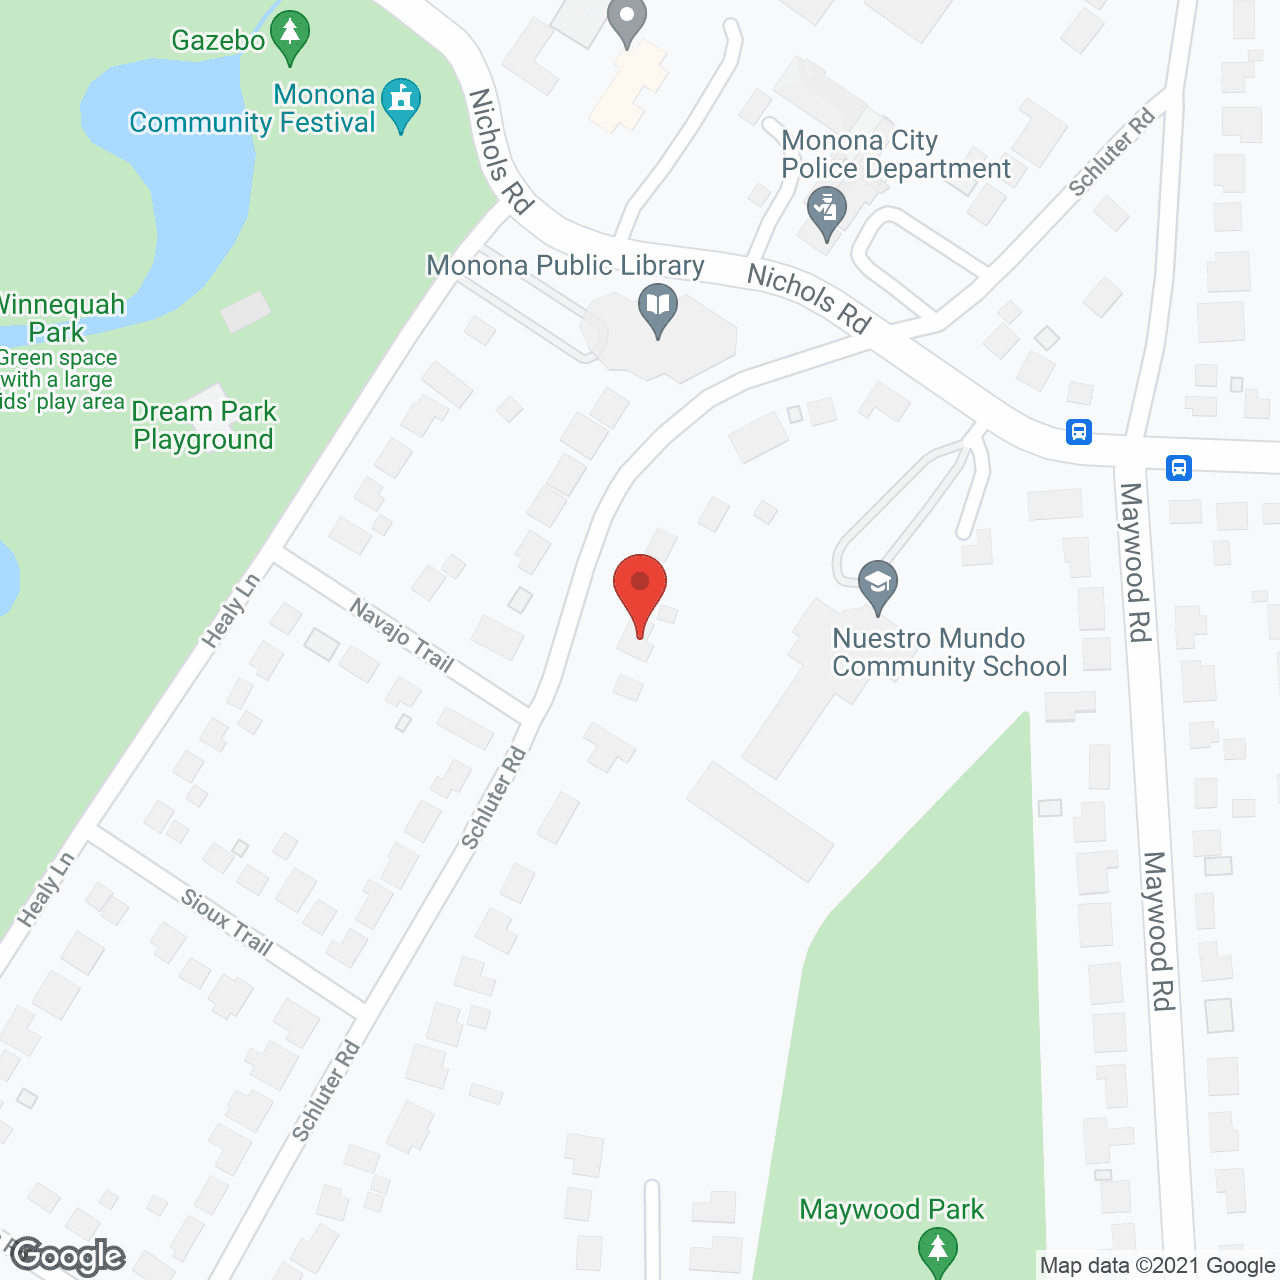 Reynolds Assisted Living Home LLC in google map